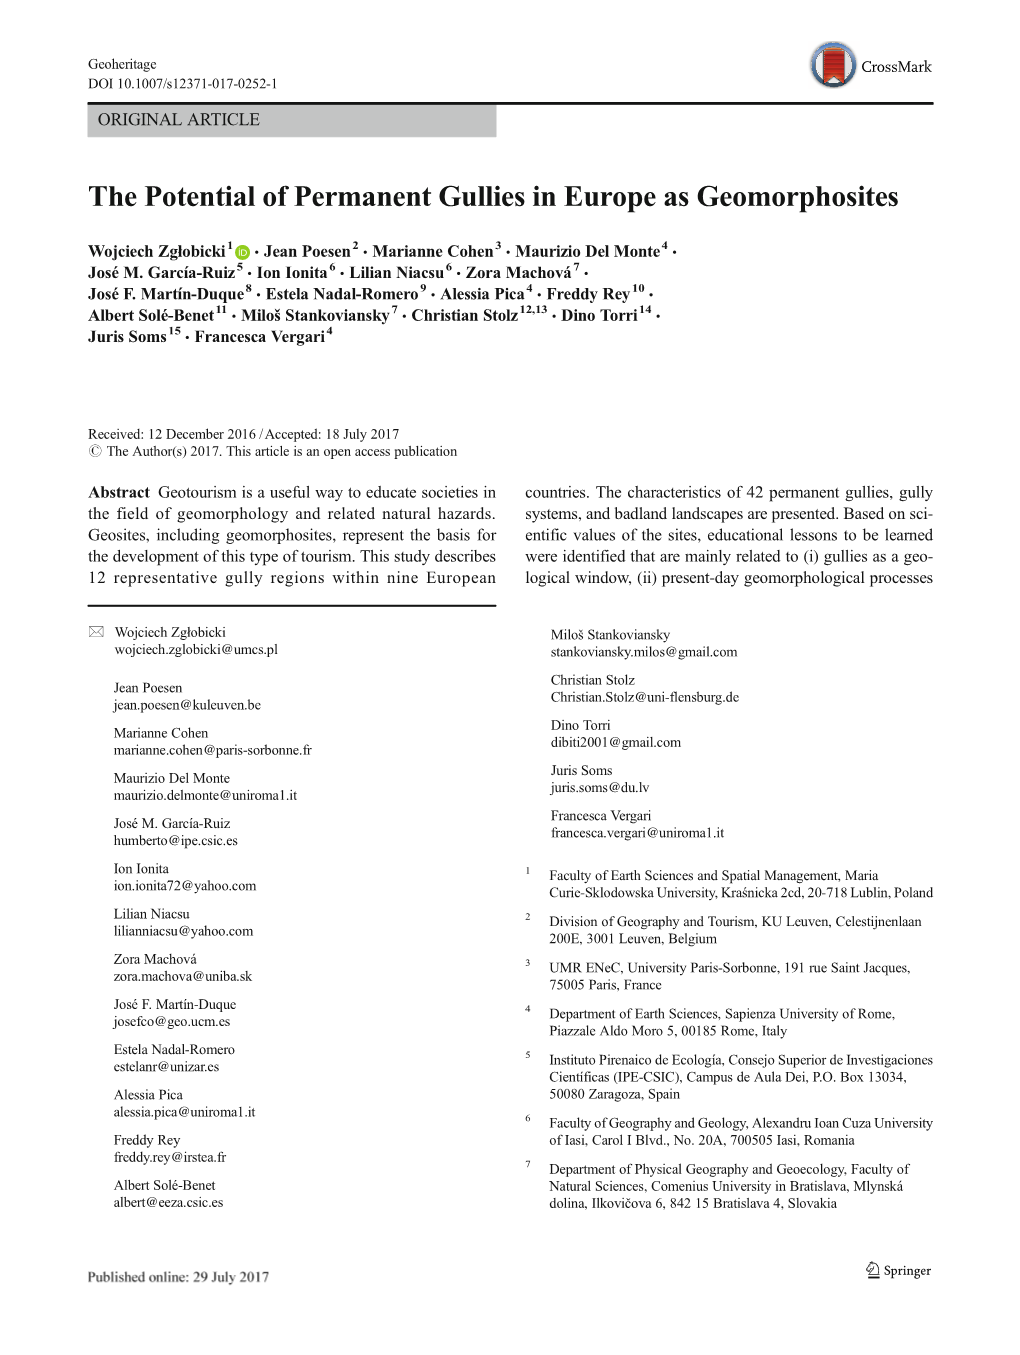 The Potential of Permanent Gullies in Europe As Geomorphosites